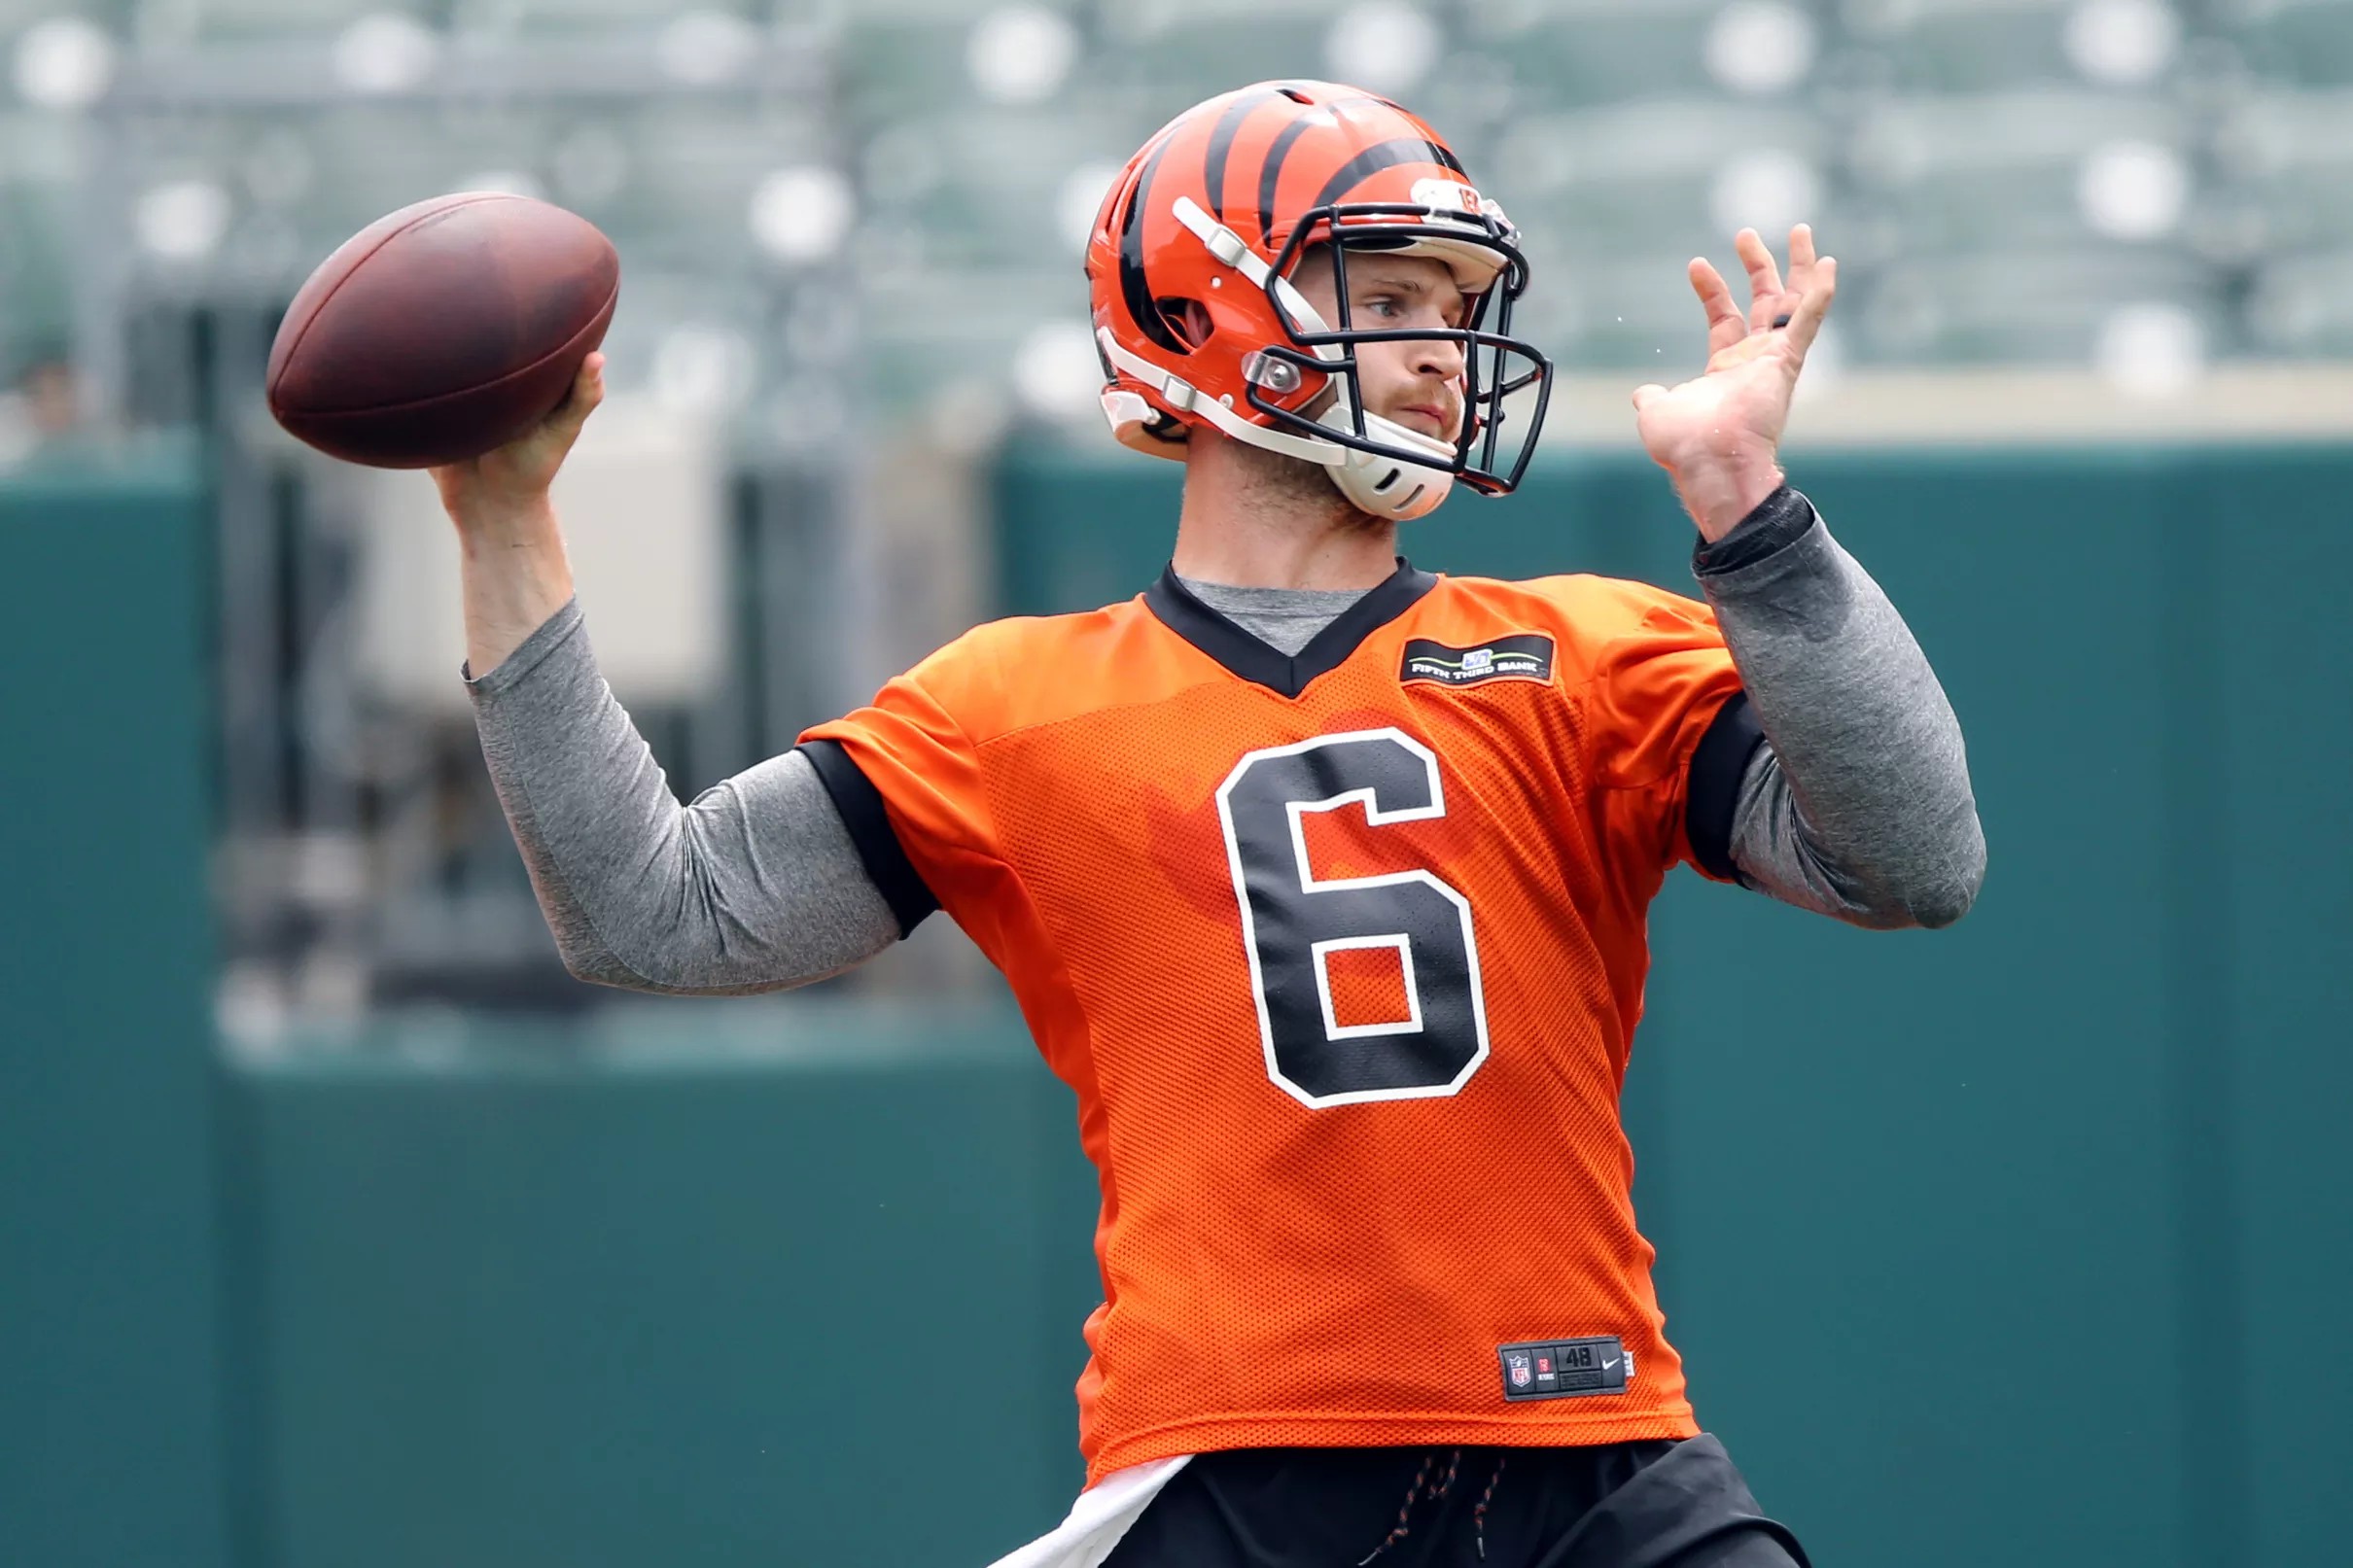 Who is the backup quarterback for the Bengals?